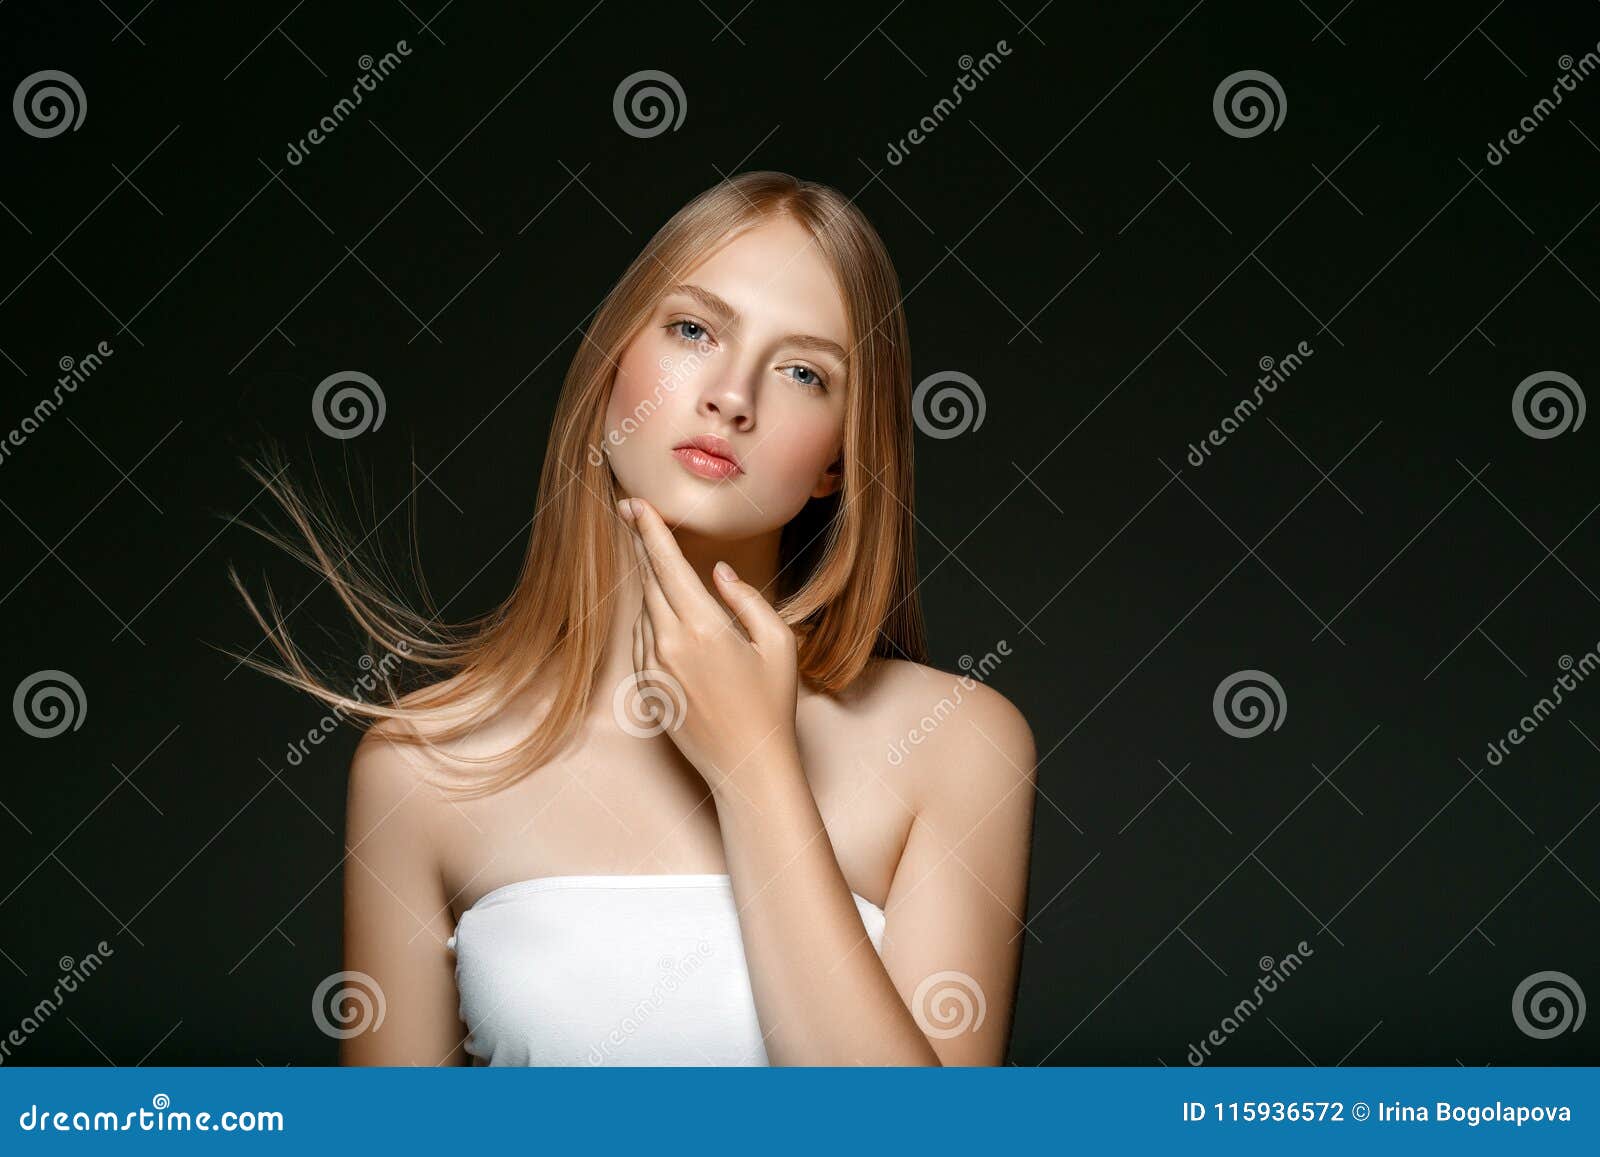 Young Girl Face Beauty Skin Portrait With Long Blonde Hair With